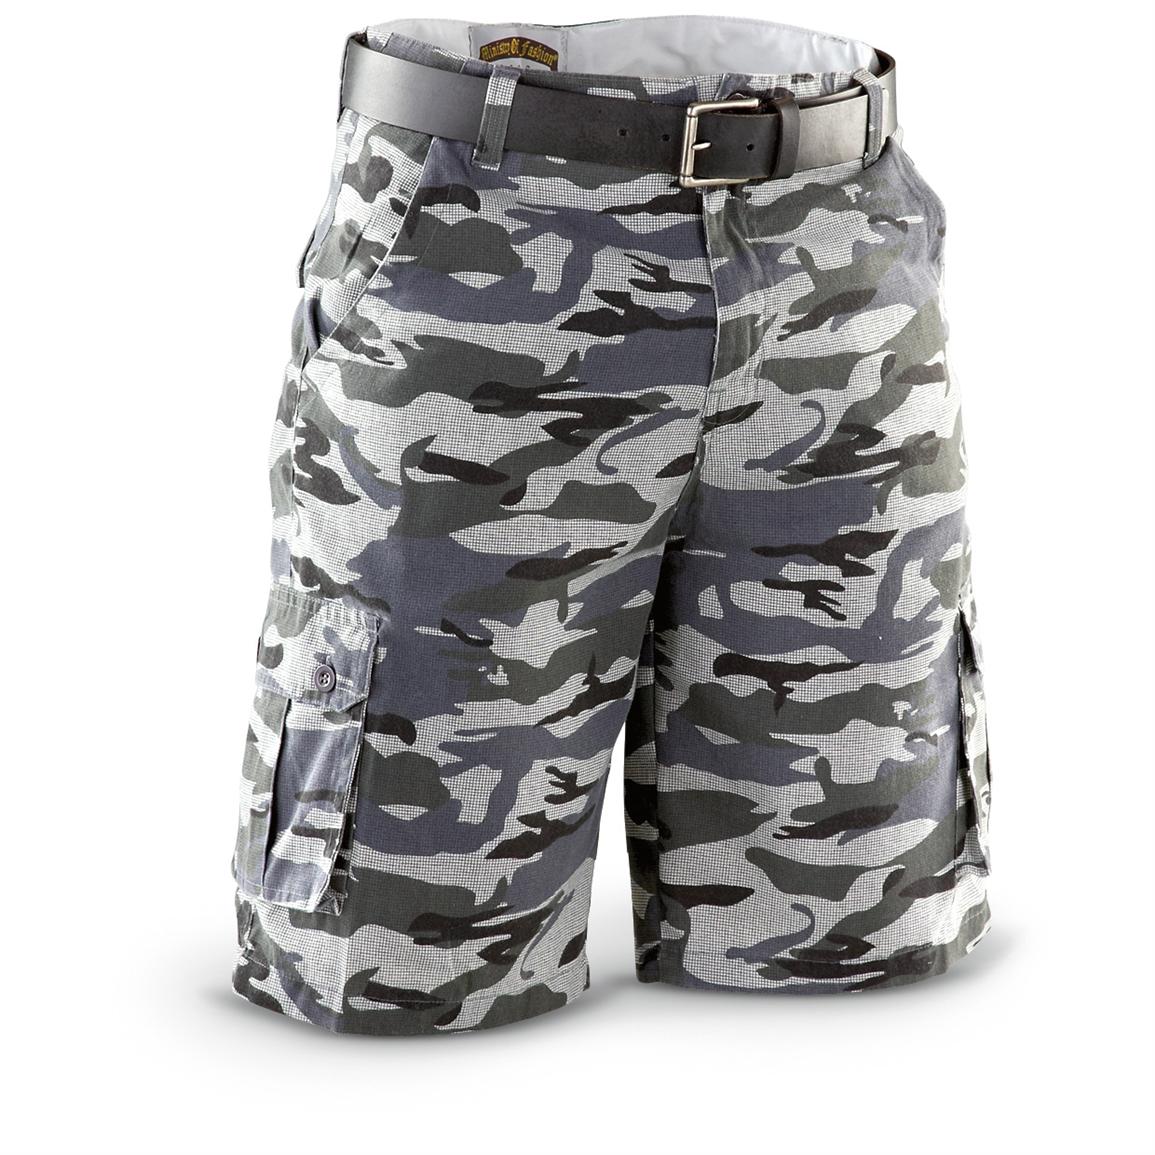 Cargo Shorts, Camo - 222601, Shorts at Sportsman's Guide